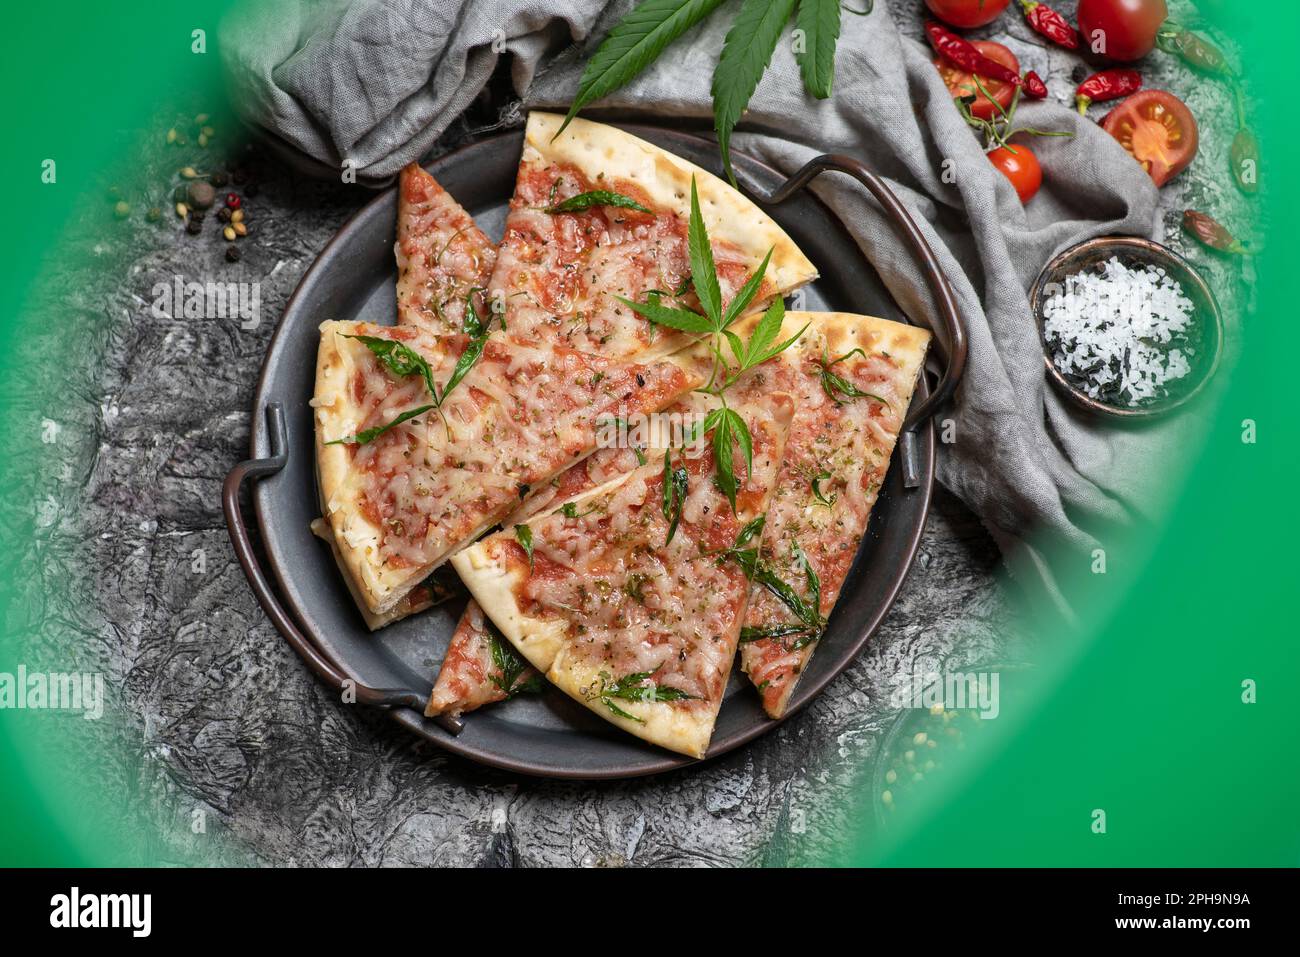 Pizza slices with marijuana leaves in a metal bowl on a dark wooden background Stock Photo